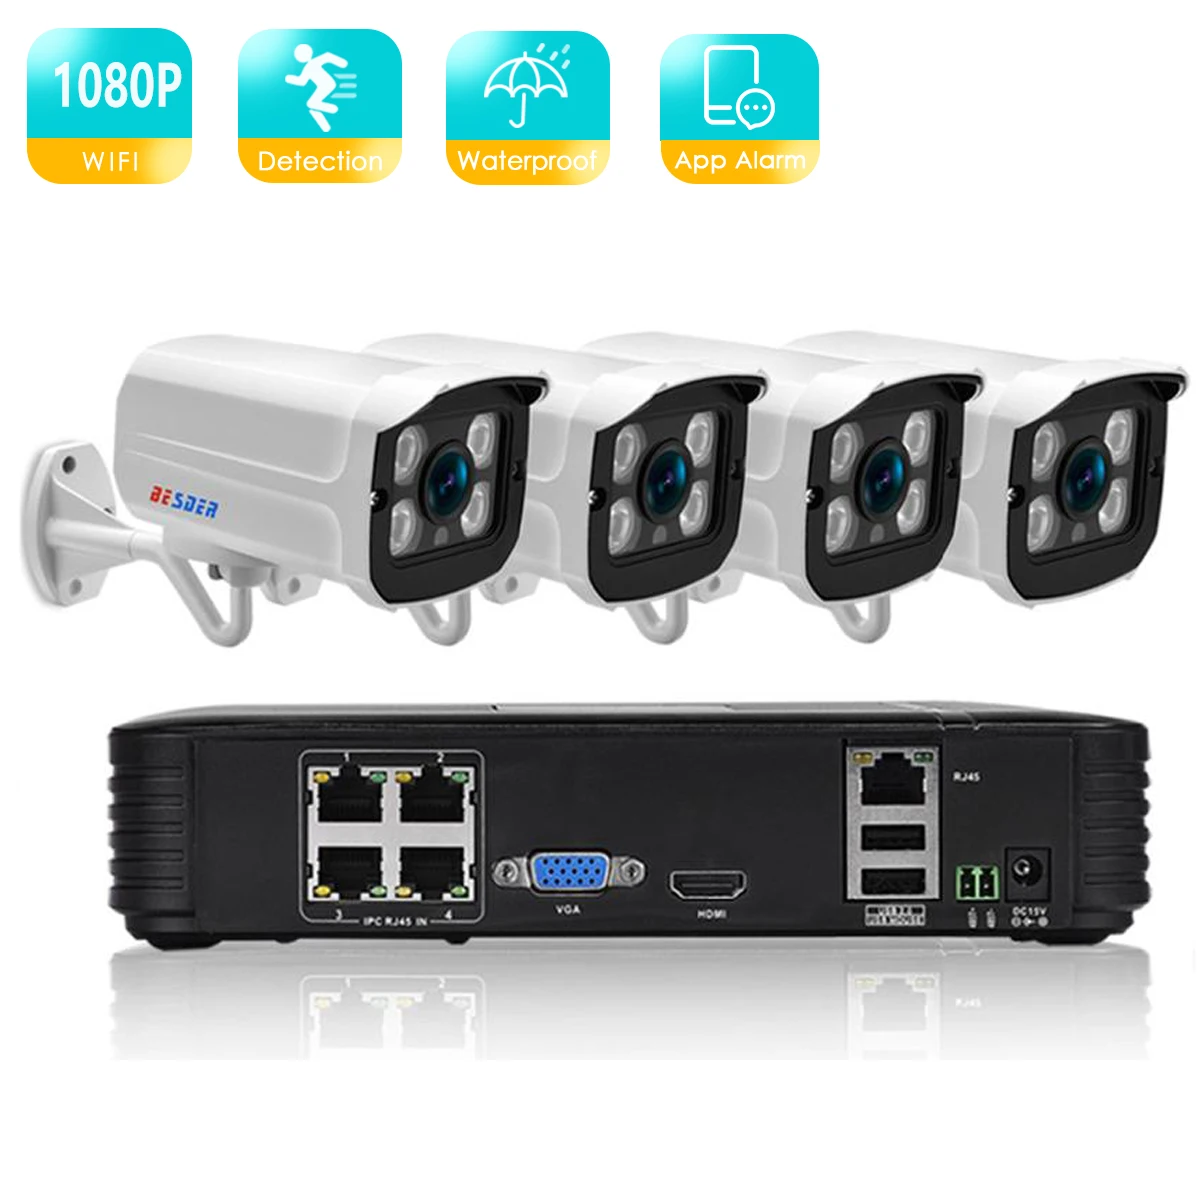 

BESDER Full HD 1080P 4 Channel CCTV System 4 pcs Metal Outdoor IP Camera 4 CH POE 15V NVR CCTV Security Kit HDMI Email Alarm P2P